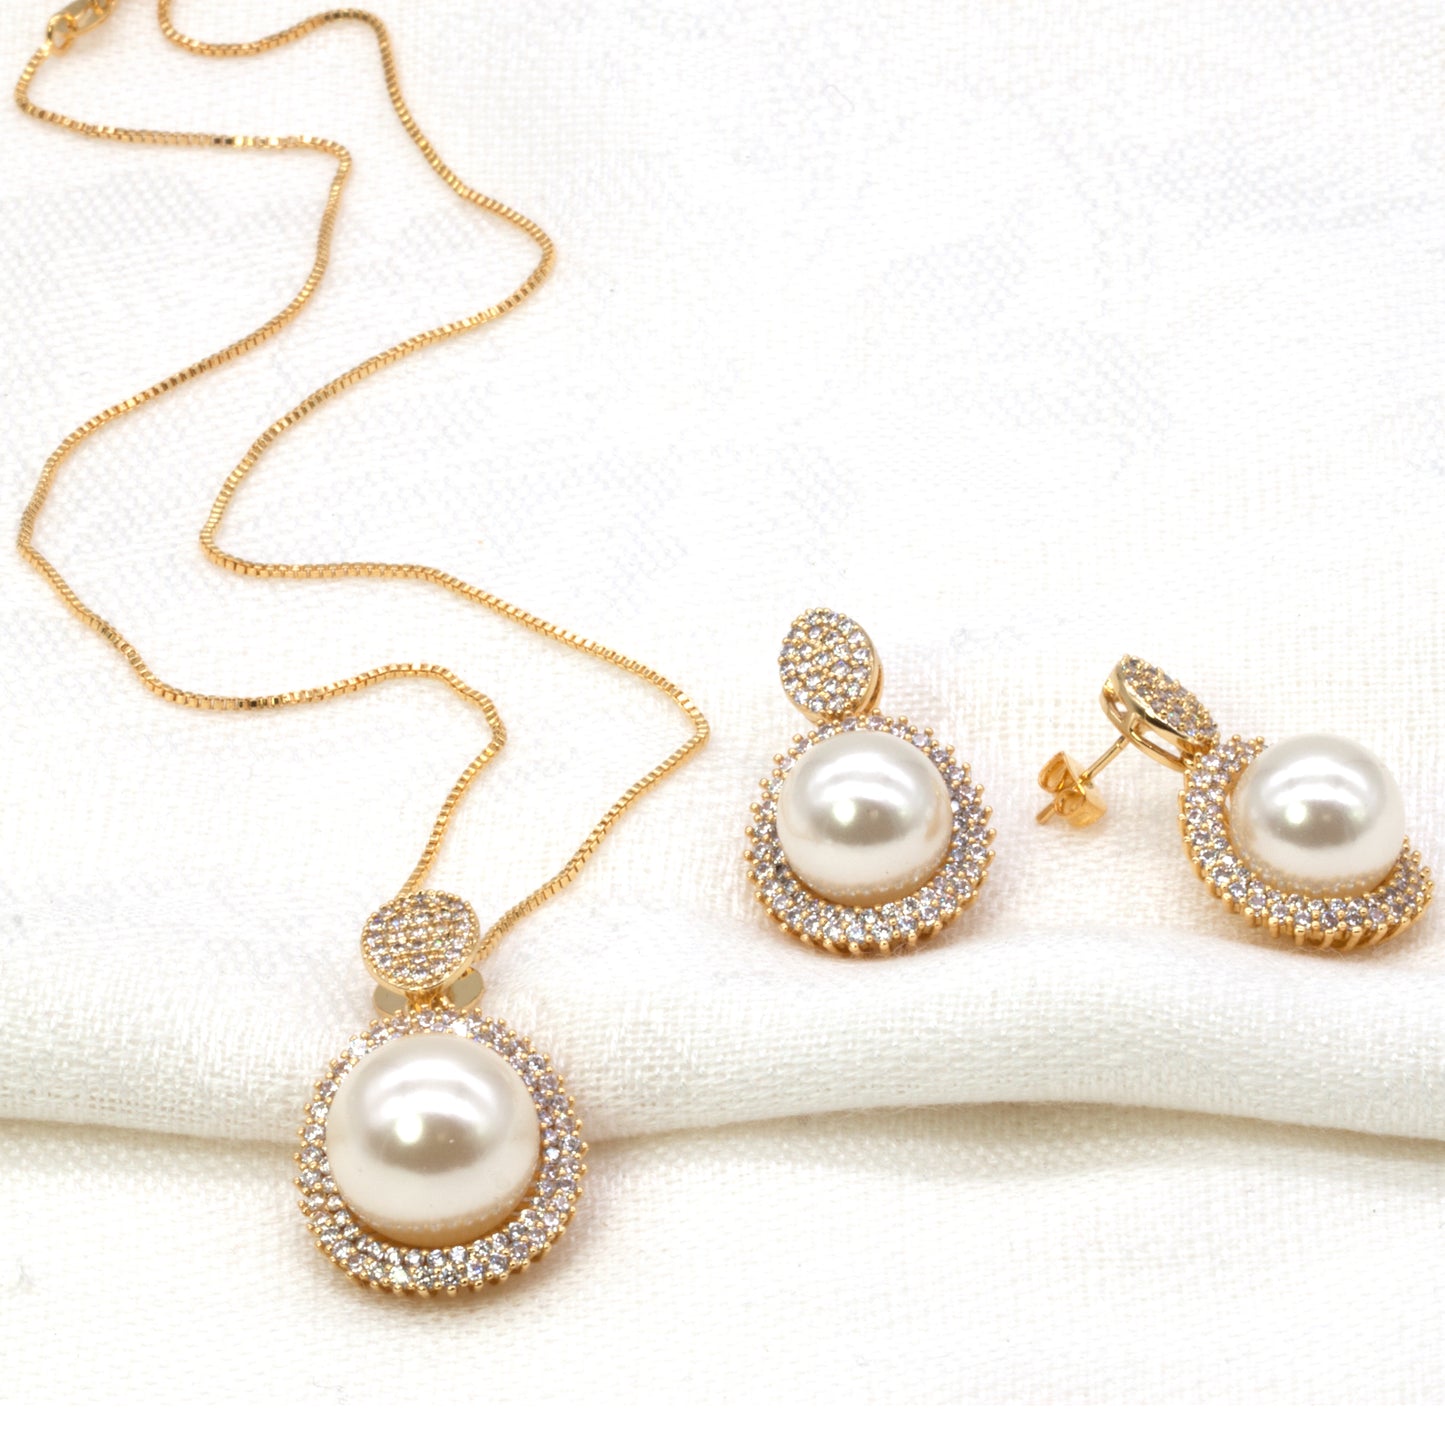 Pearl Dangle Earrings with AAA Cubic Zirconia, Gold Plated (Earrings Only)